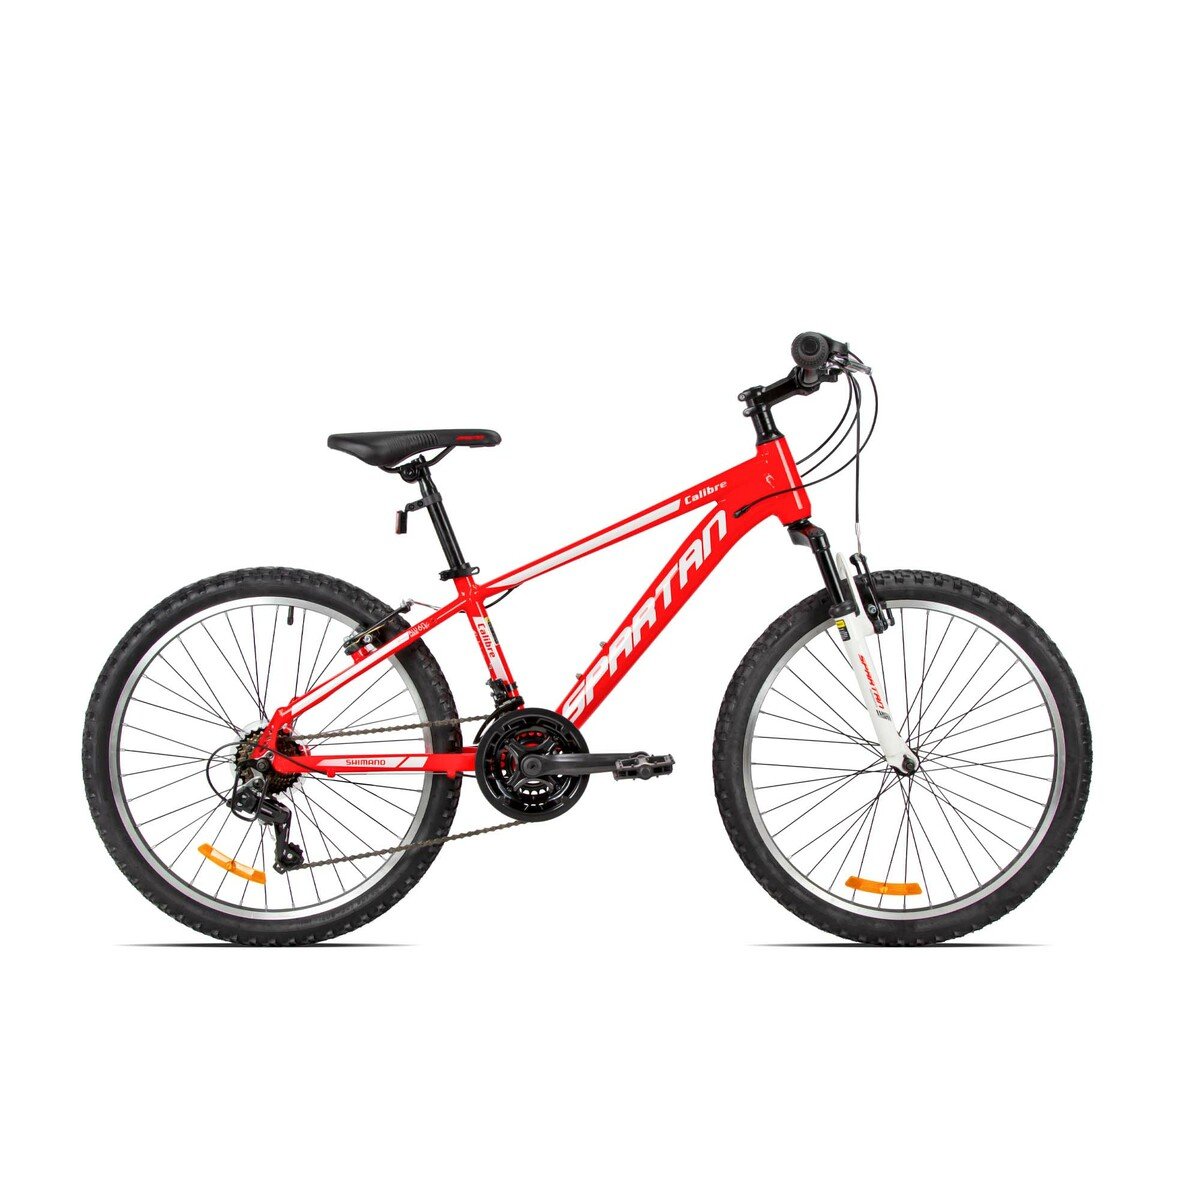 Spartan Bicycle 24" Calibre Hardtail MTB - Flame Red SP-3174